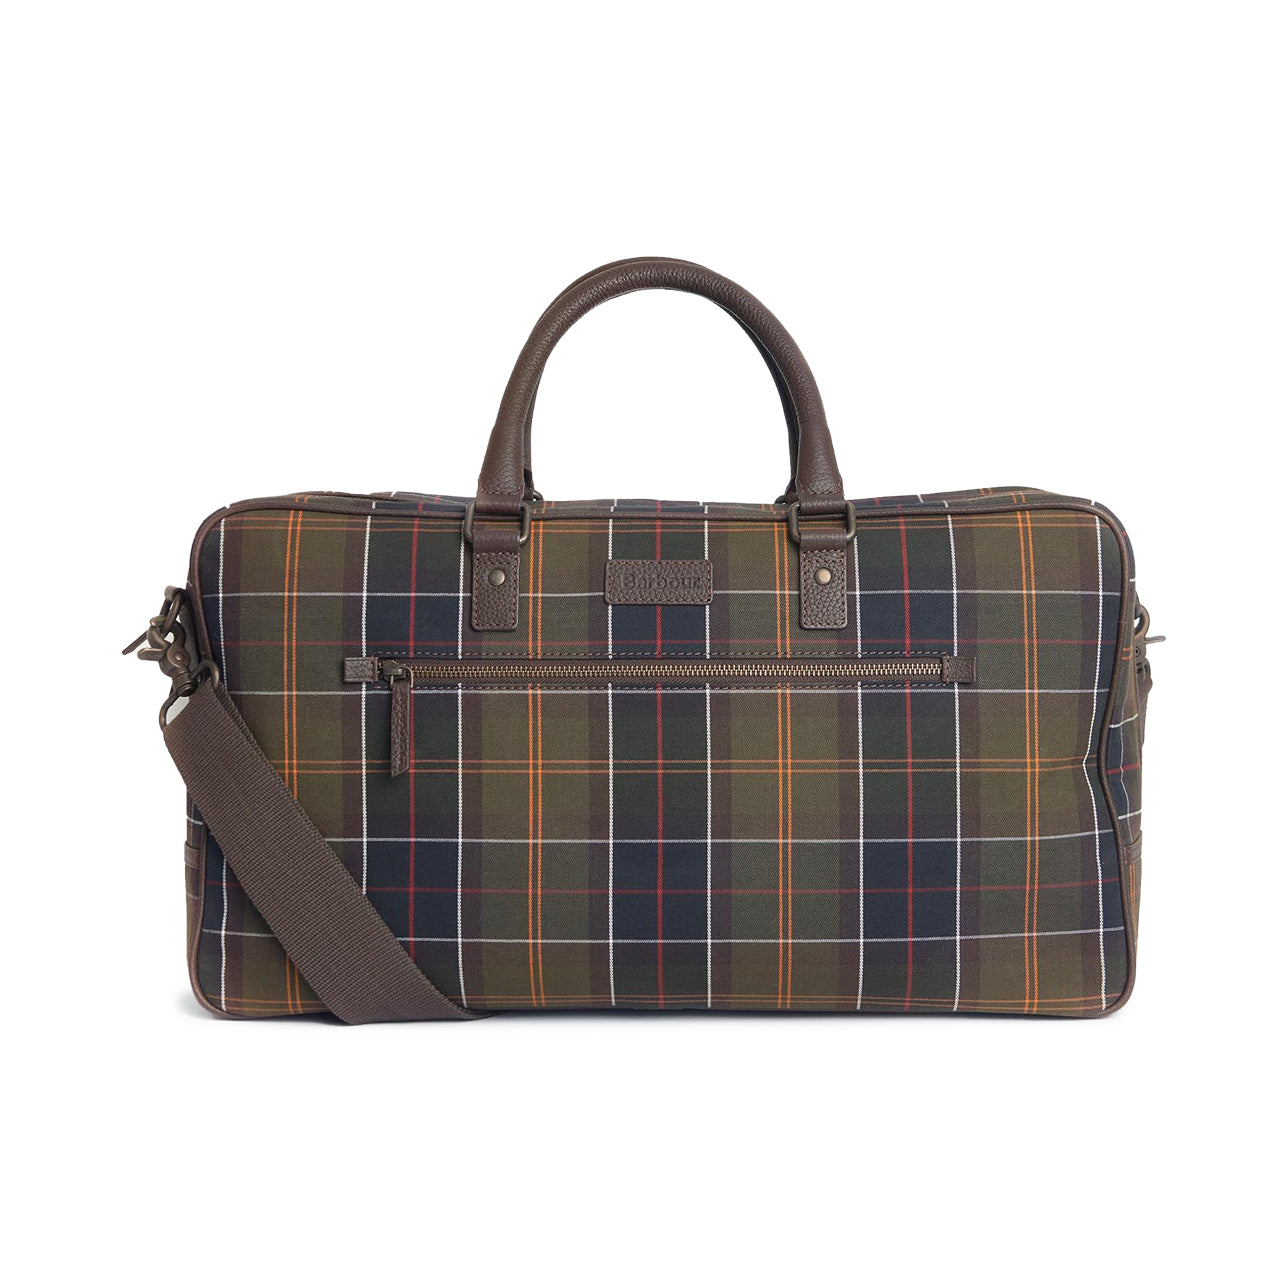 Barbour Tartan & Leather Holdall, #Barbour #Tartan #Leather #Holdall